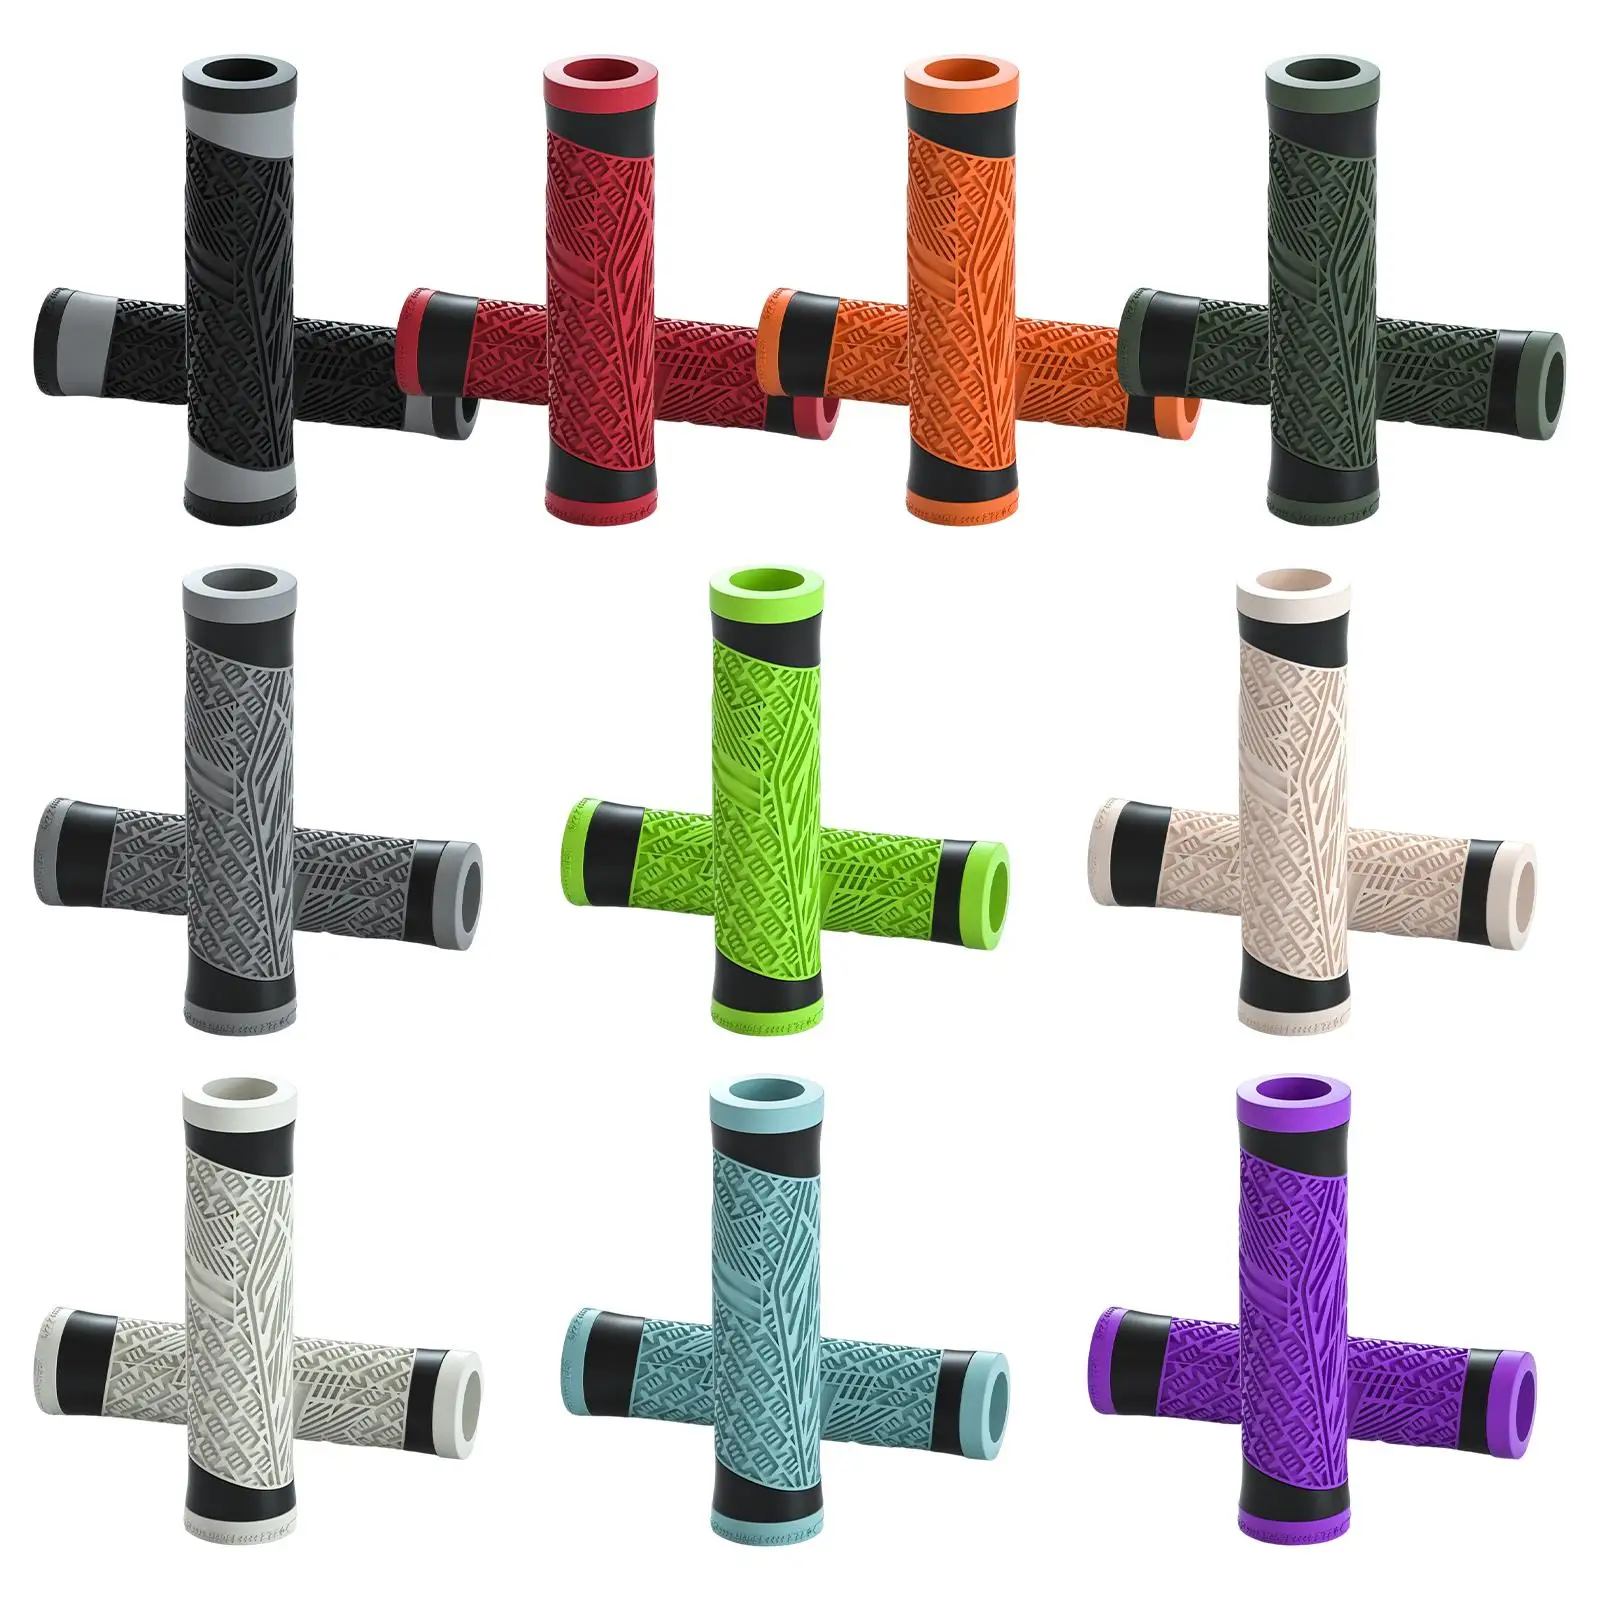 Universal Bike Handle Grips Shock Absorbing Brake Handle Replacement Protection Cover Comfortable for BMX Road Bike